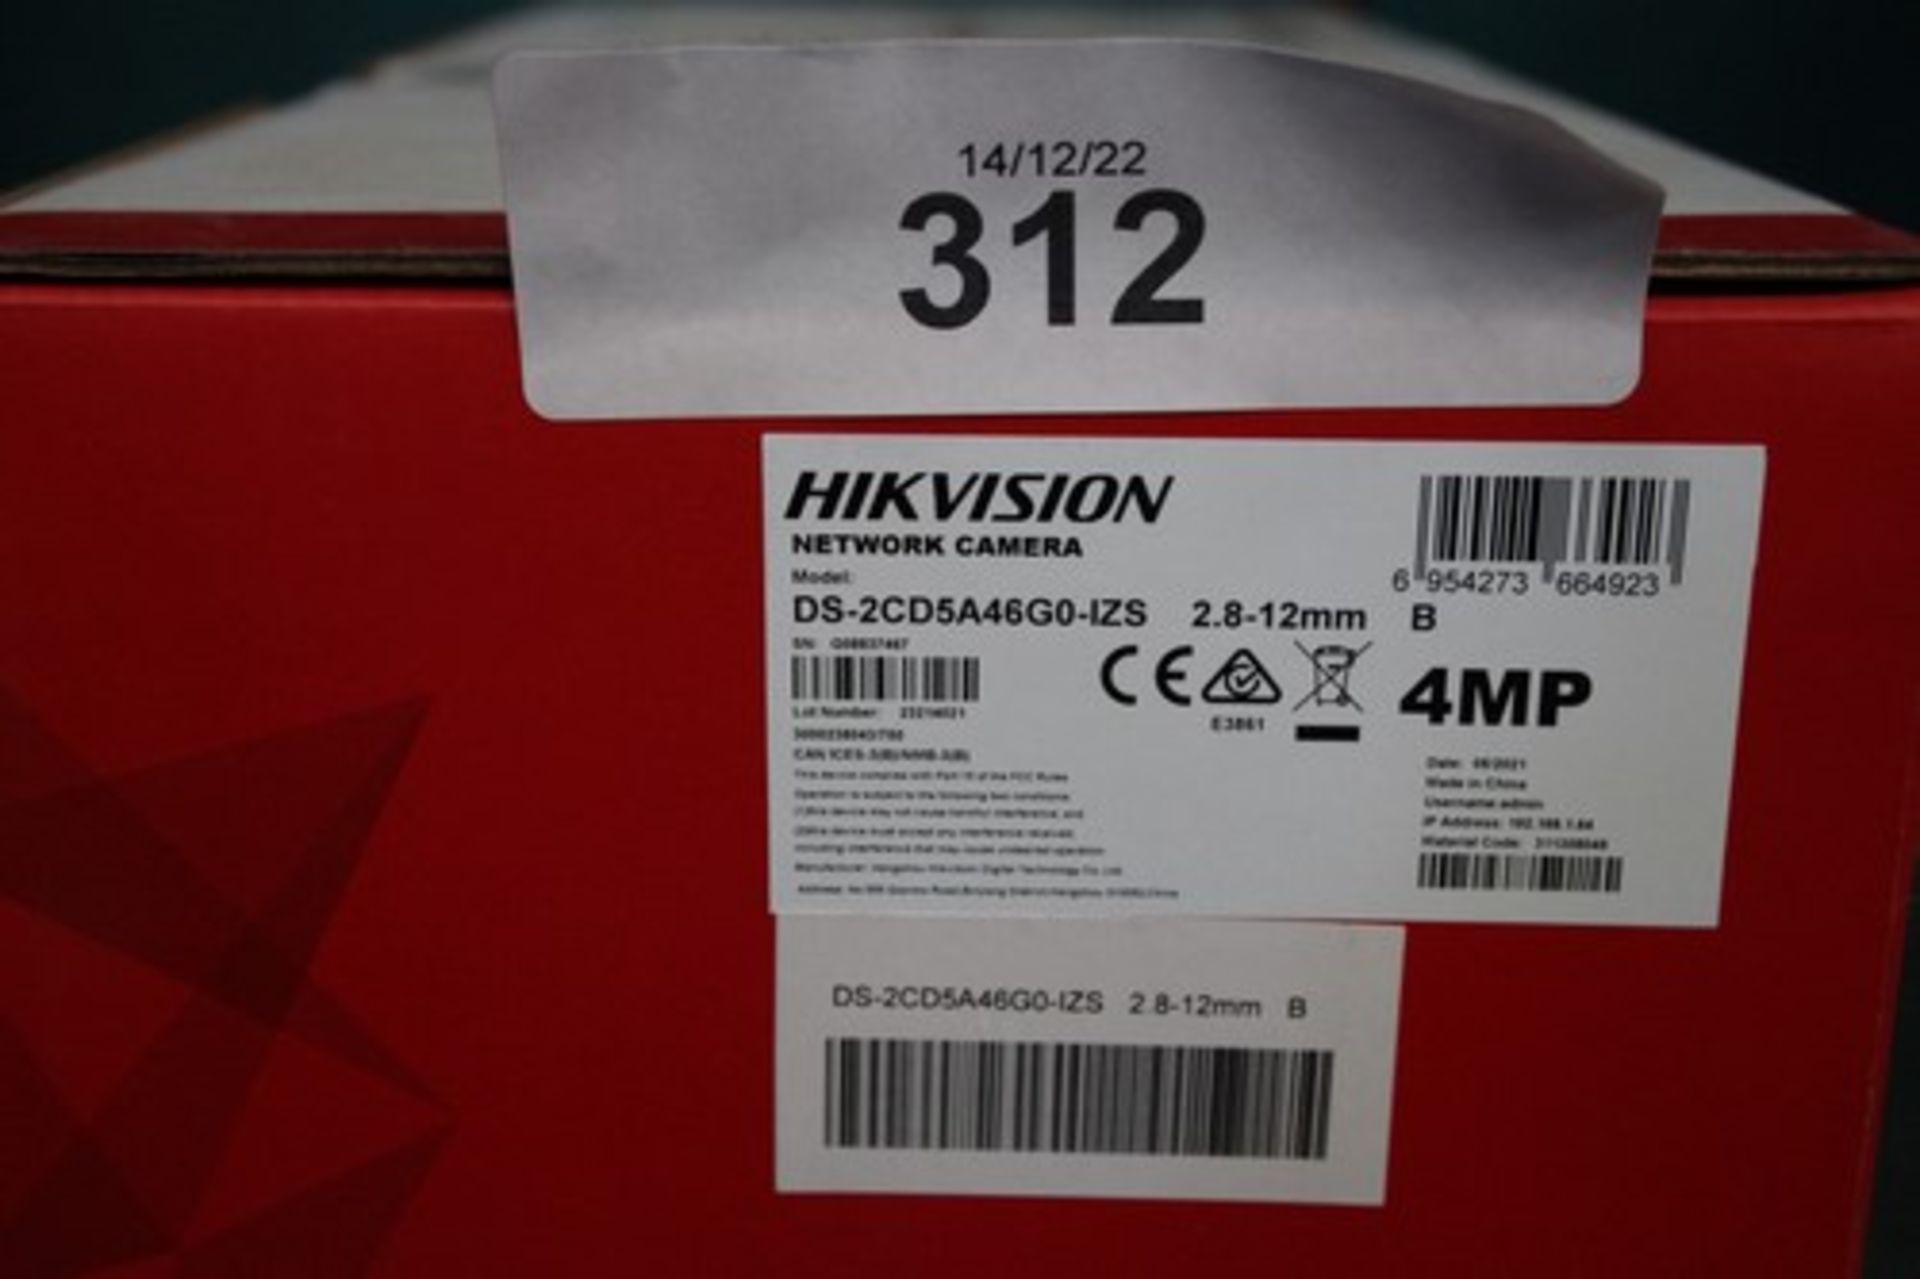 1 x Hikvision Dark Fighter camera, model DS-2CD5A46G0-125 - sealed new in box (C12C) - Image 2 of 2